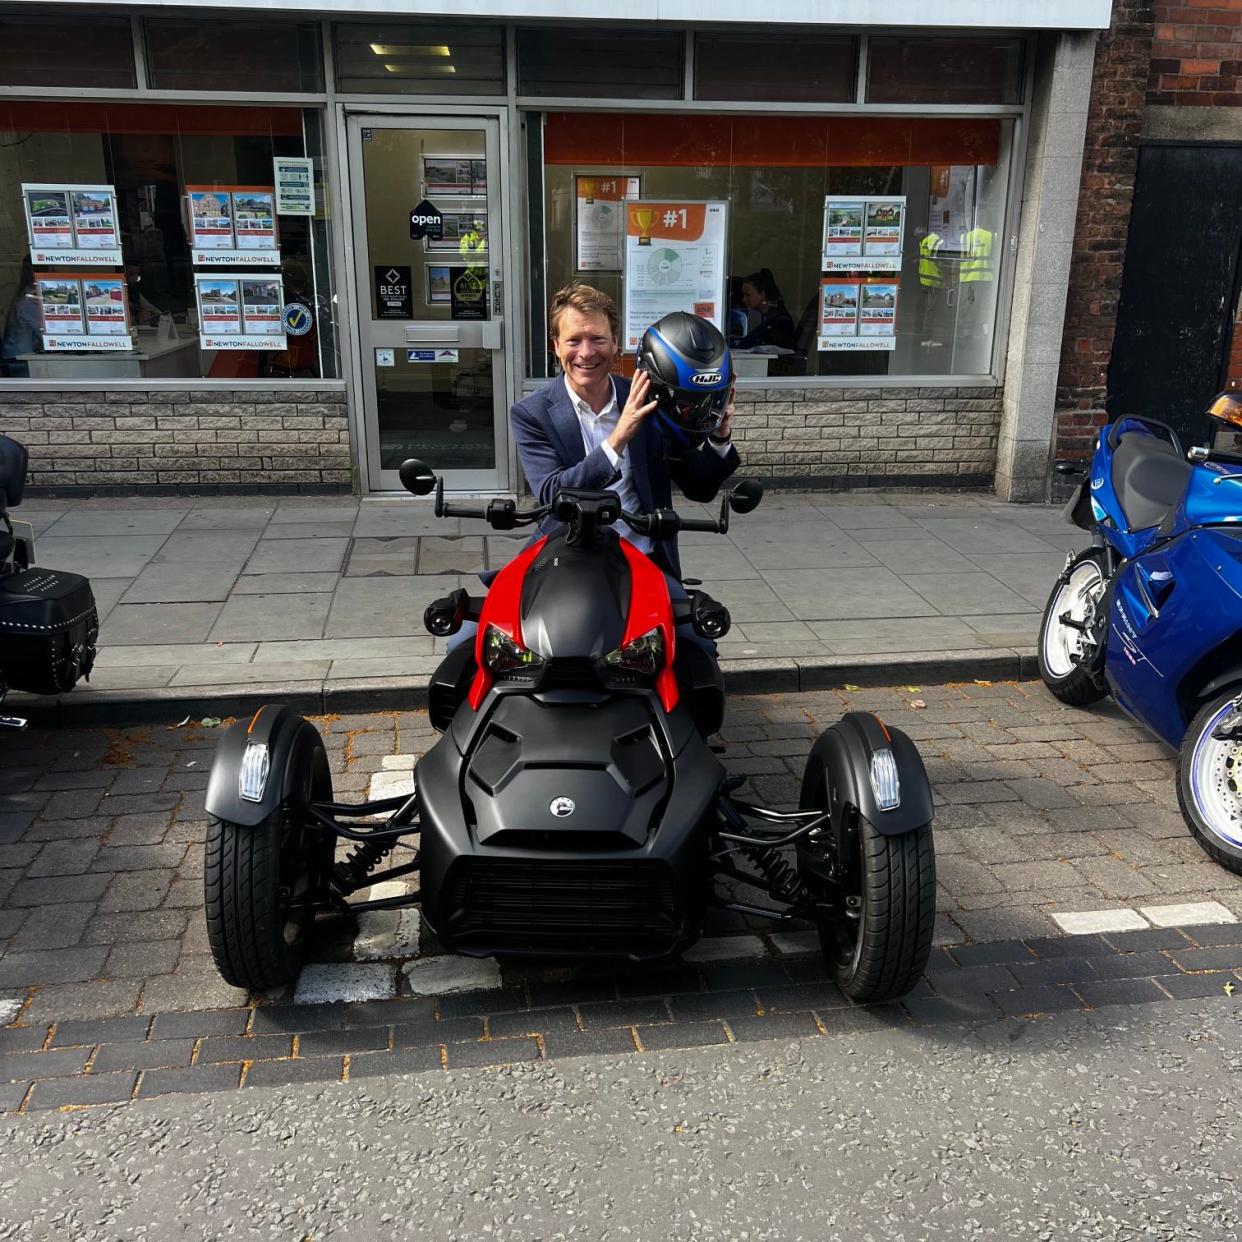 Richard Tice at the wheel of a trike motorcycle in Boston, Lincolnshire